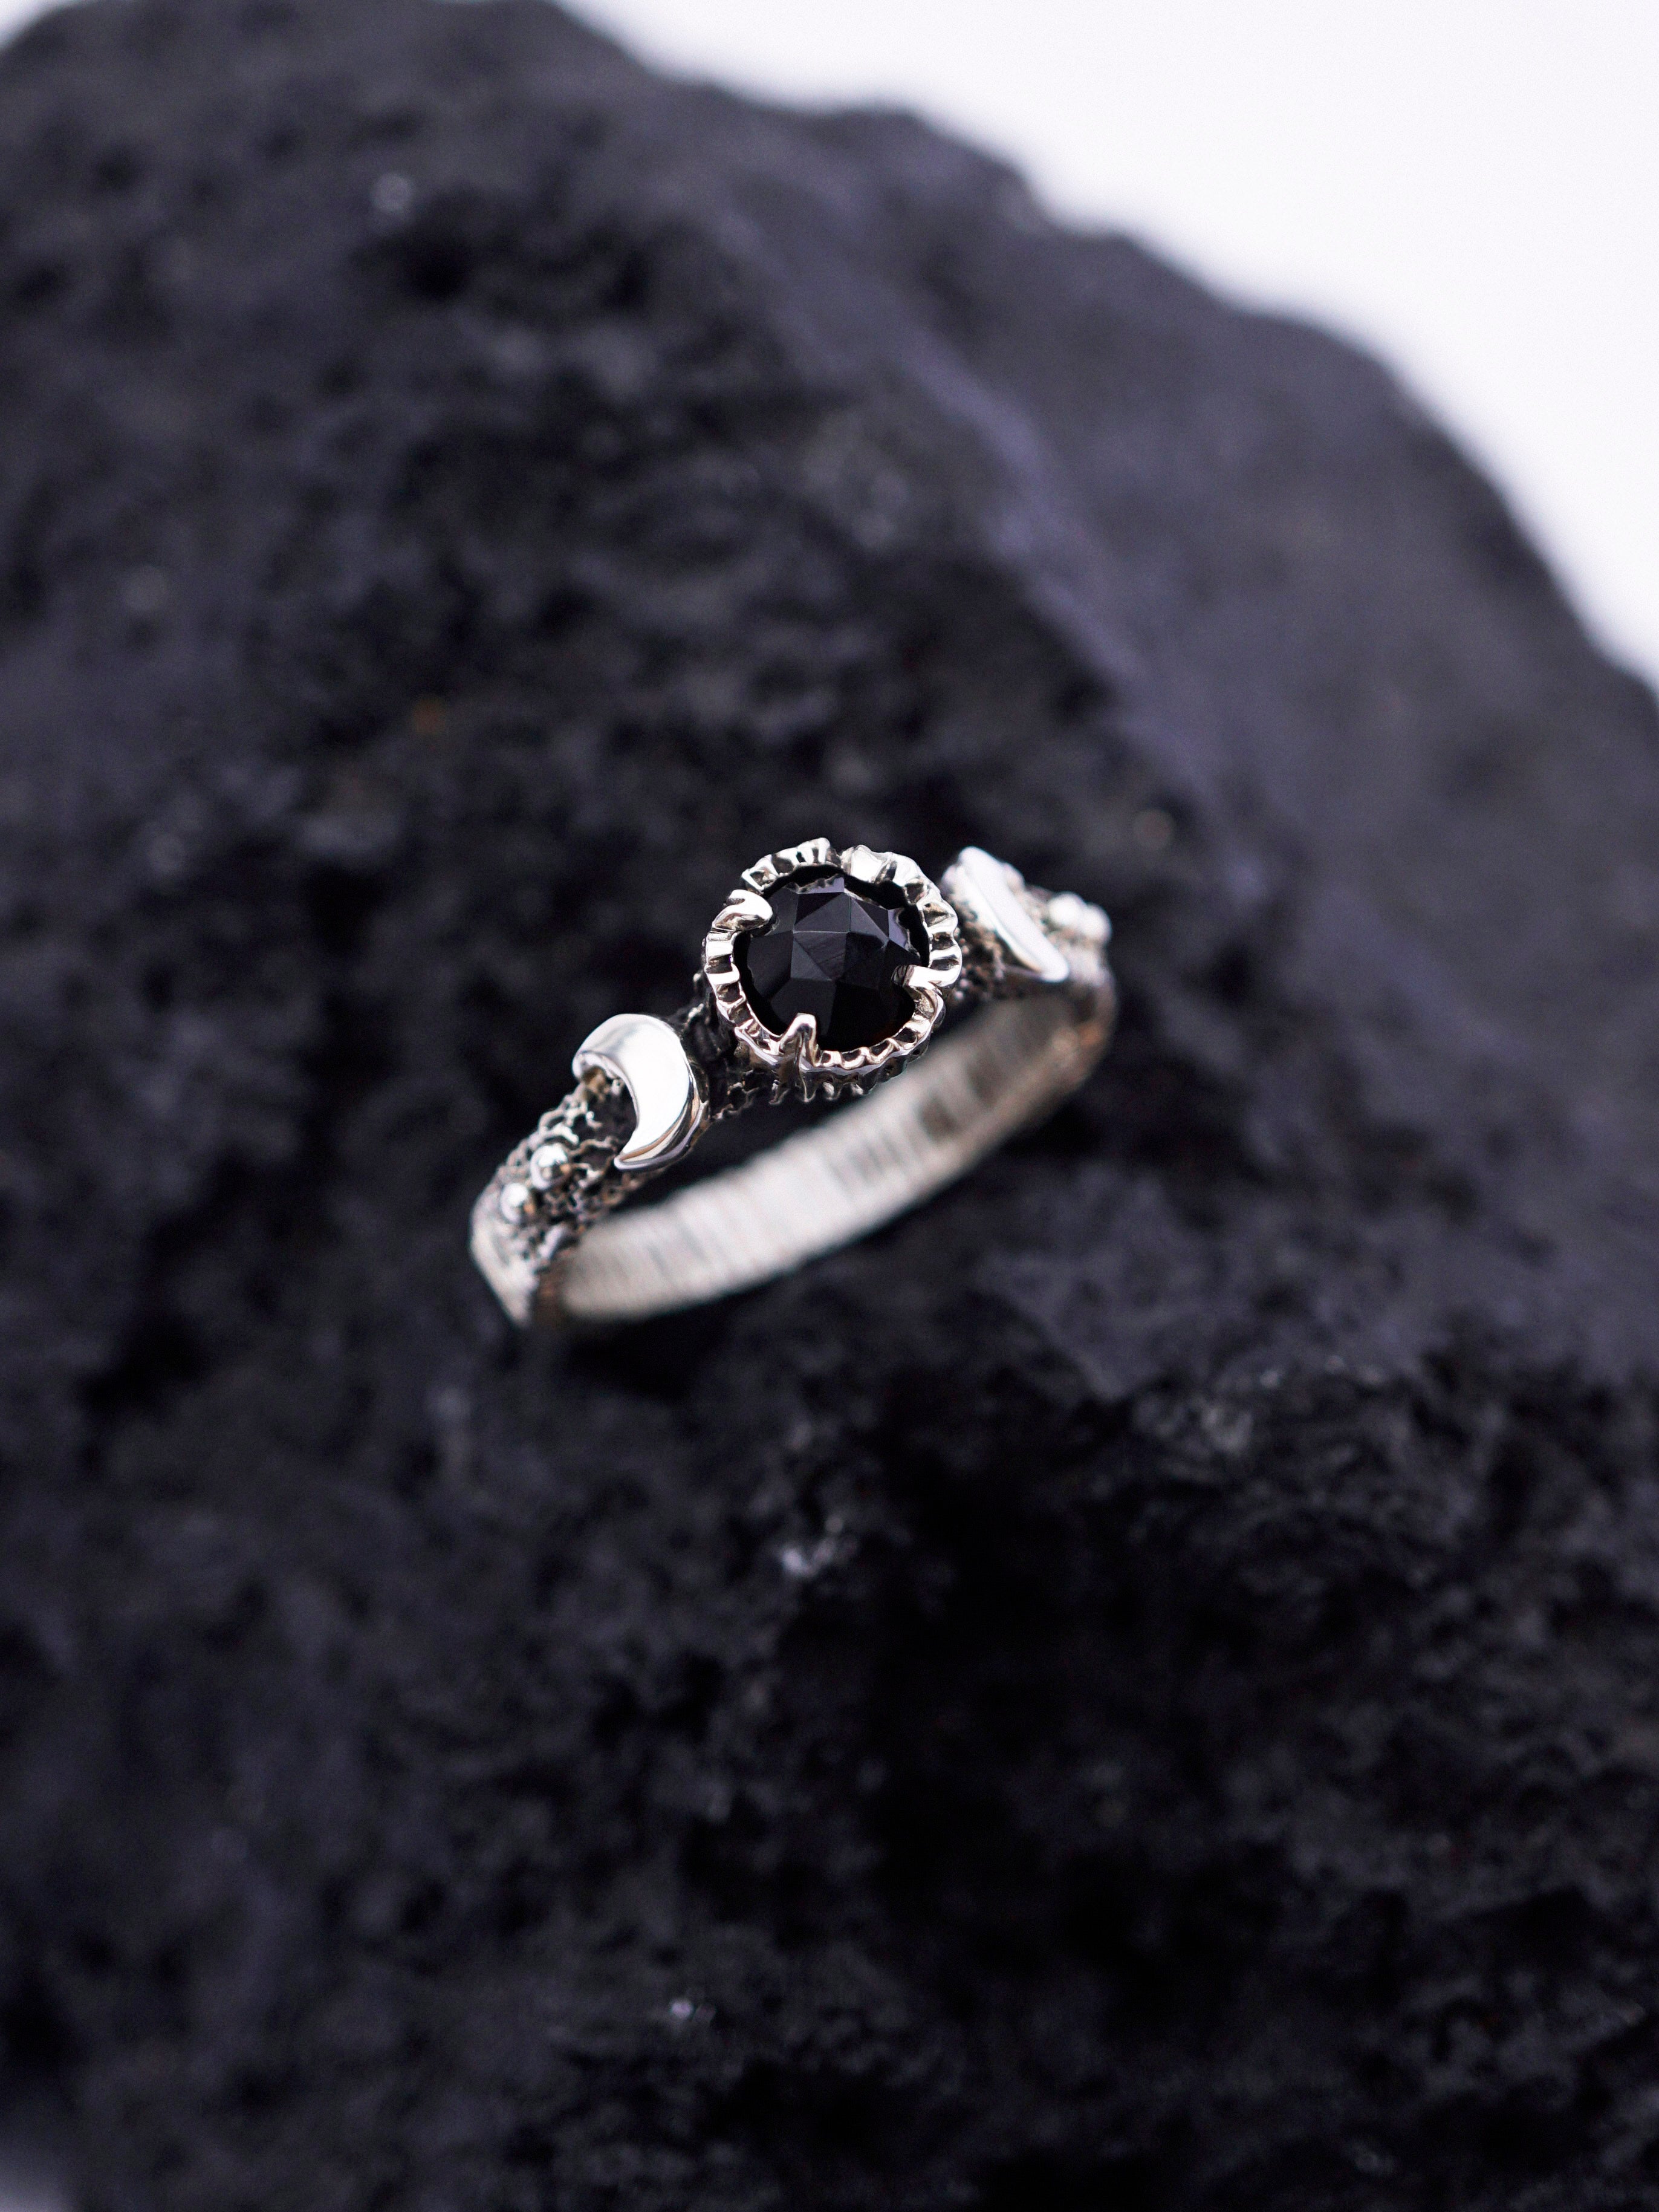 Black Moon ring Gothic engagement ring Black Onyx ring Moon phases ring from the Sterling silver 925 